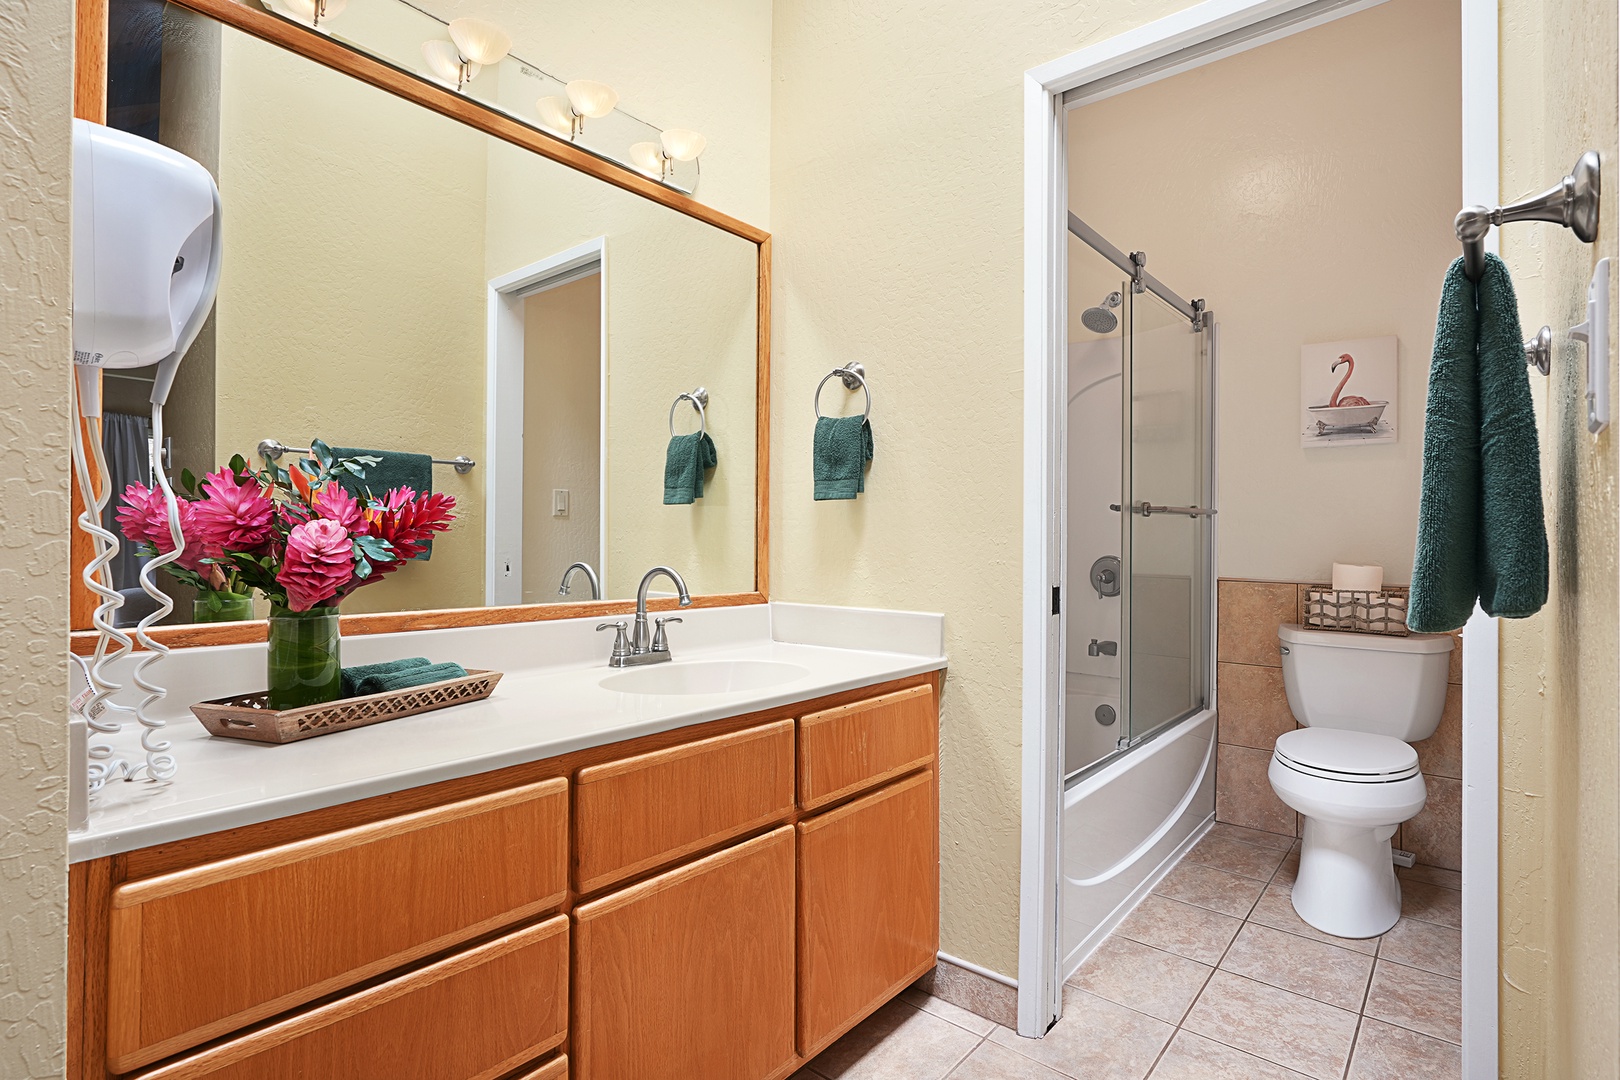 Koloa Vacation Rentals, Kauai Birdsong at Poipu Crater - The spacious ensuite bathroom has a shower/tub combo and vanity area.